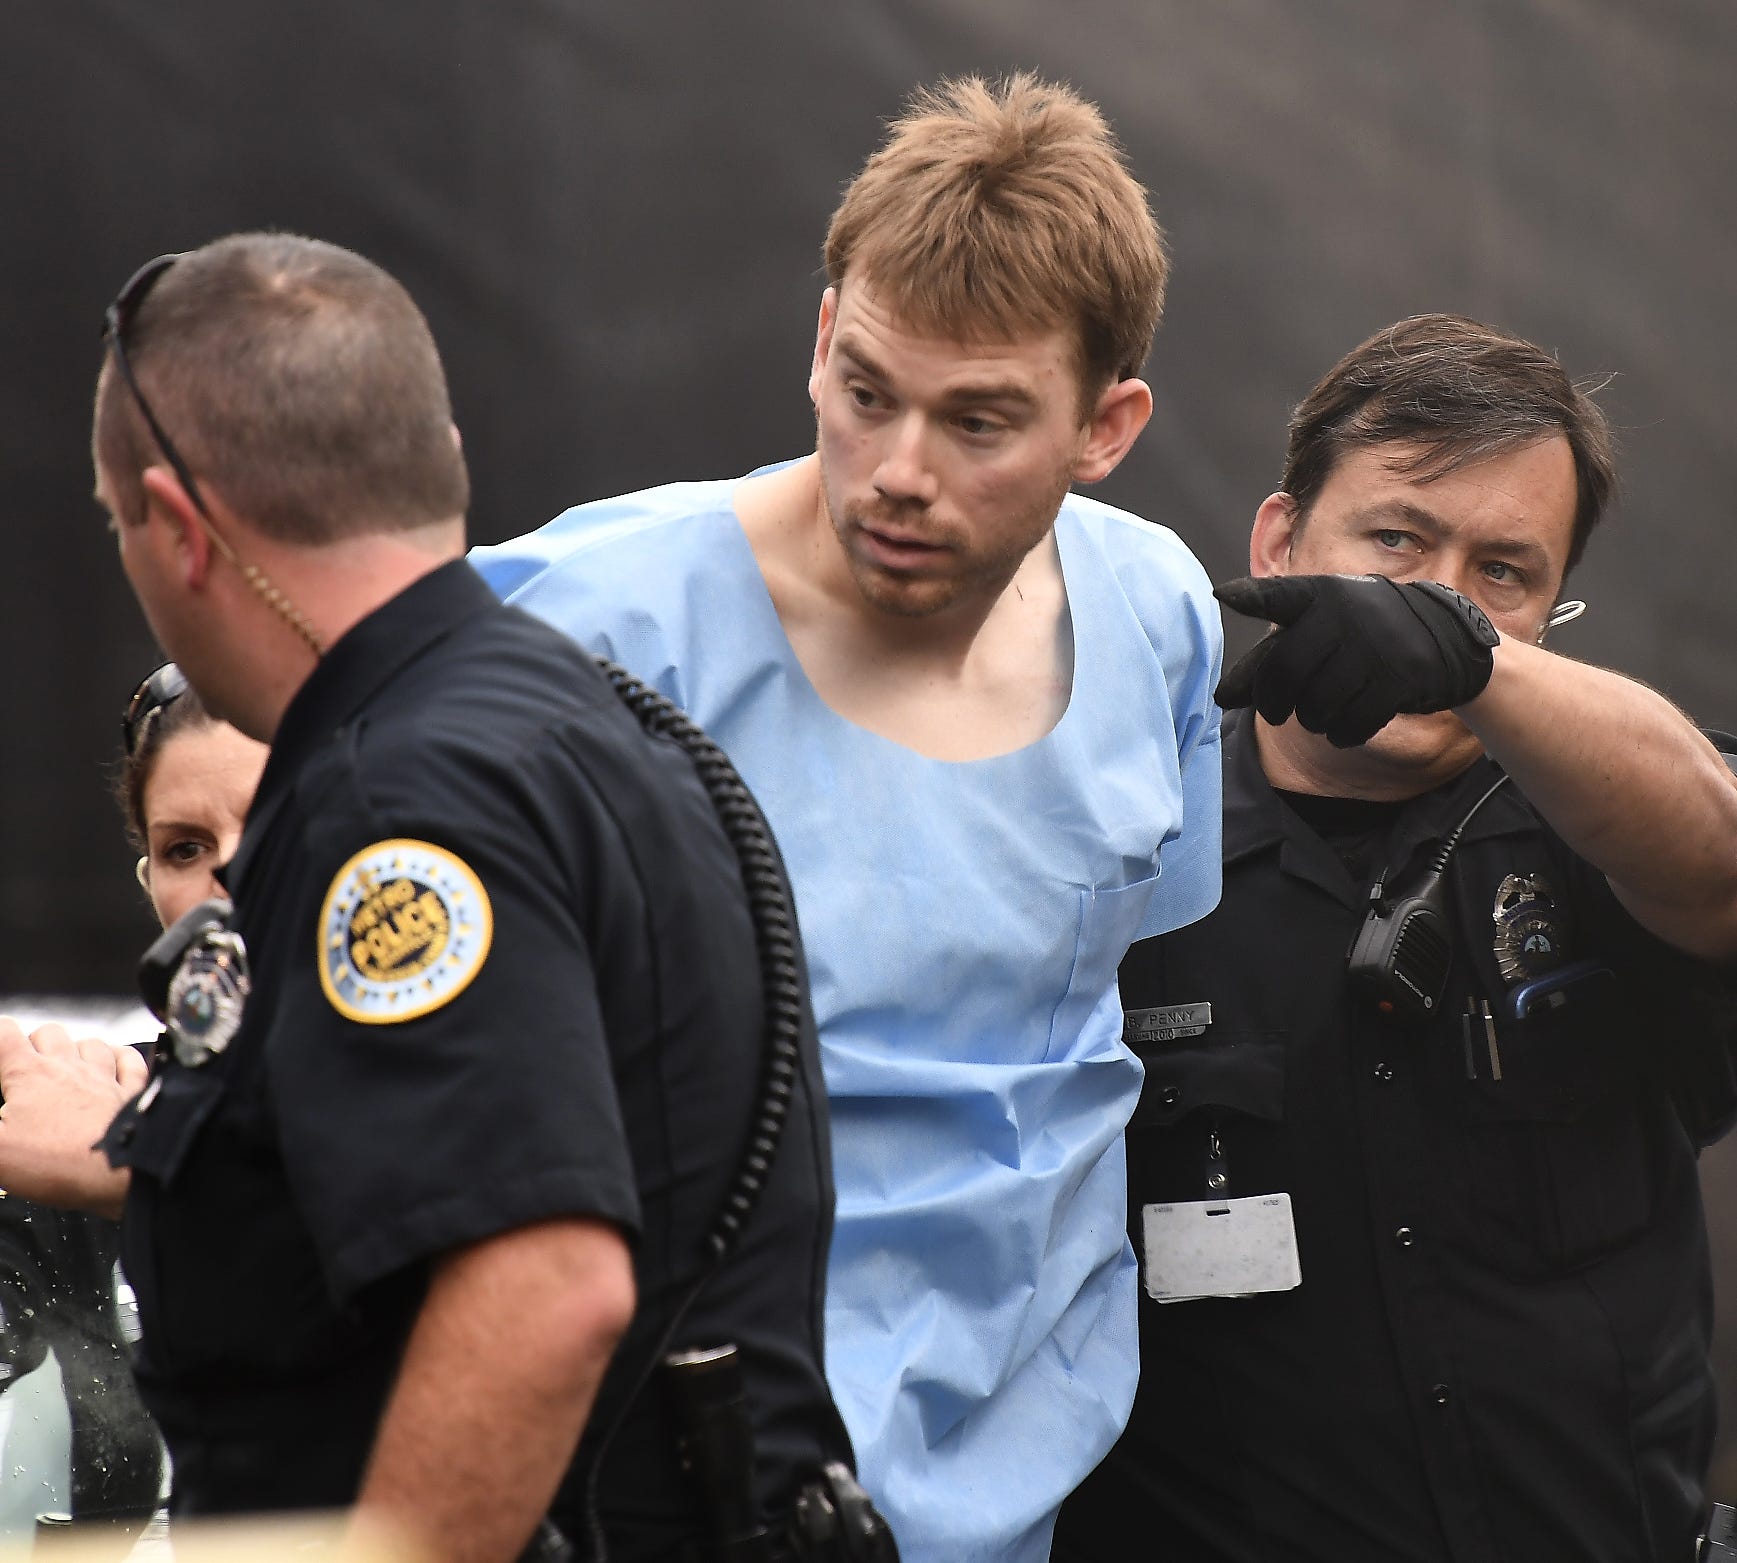 Law enforcement personnel escort Waffle House shooting suspect Travis Reinking into booking Monday, April 23, 2018, at Hill Detention Center in Nashville.